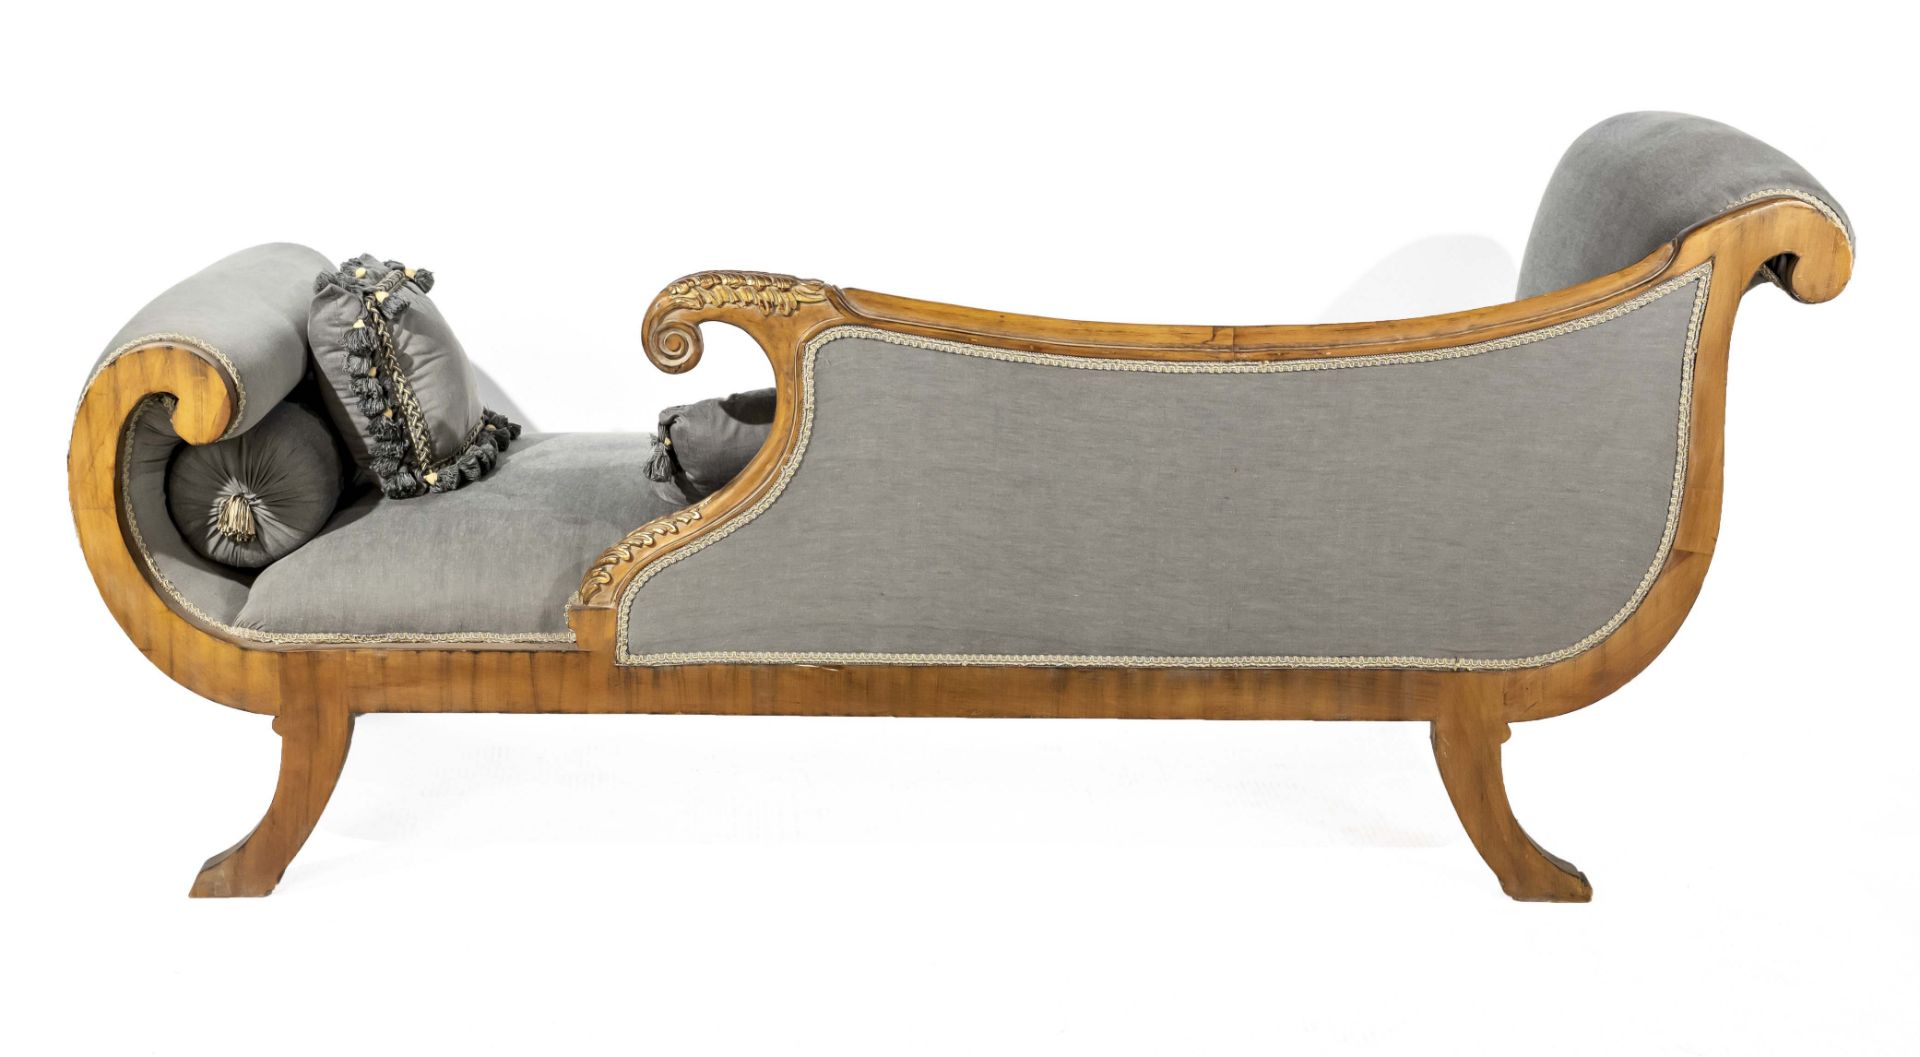 Decorative Empire-style chaise longue, late 20th century, solid beech, carved and partly gold- - Image 2 of 2